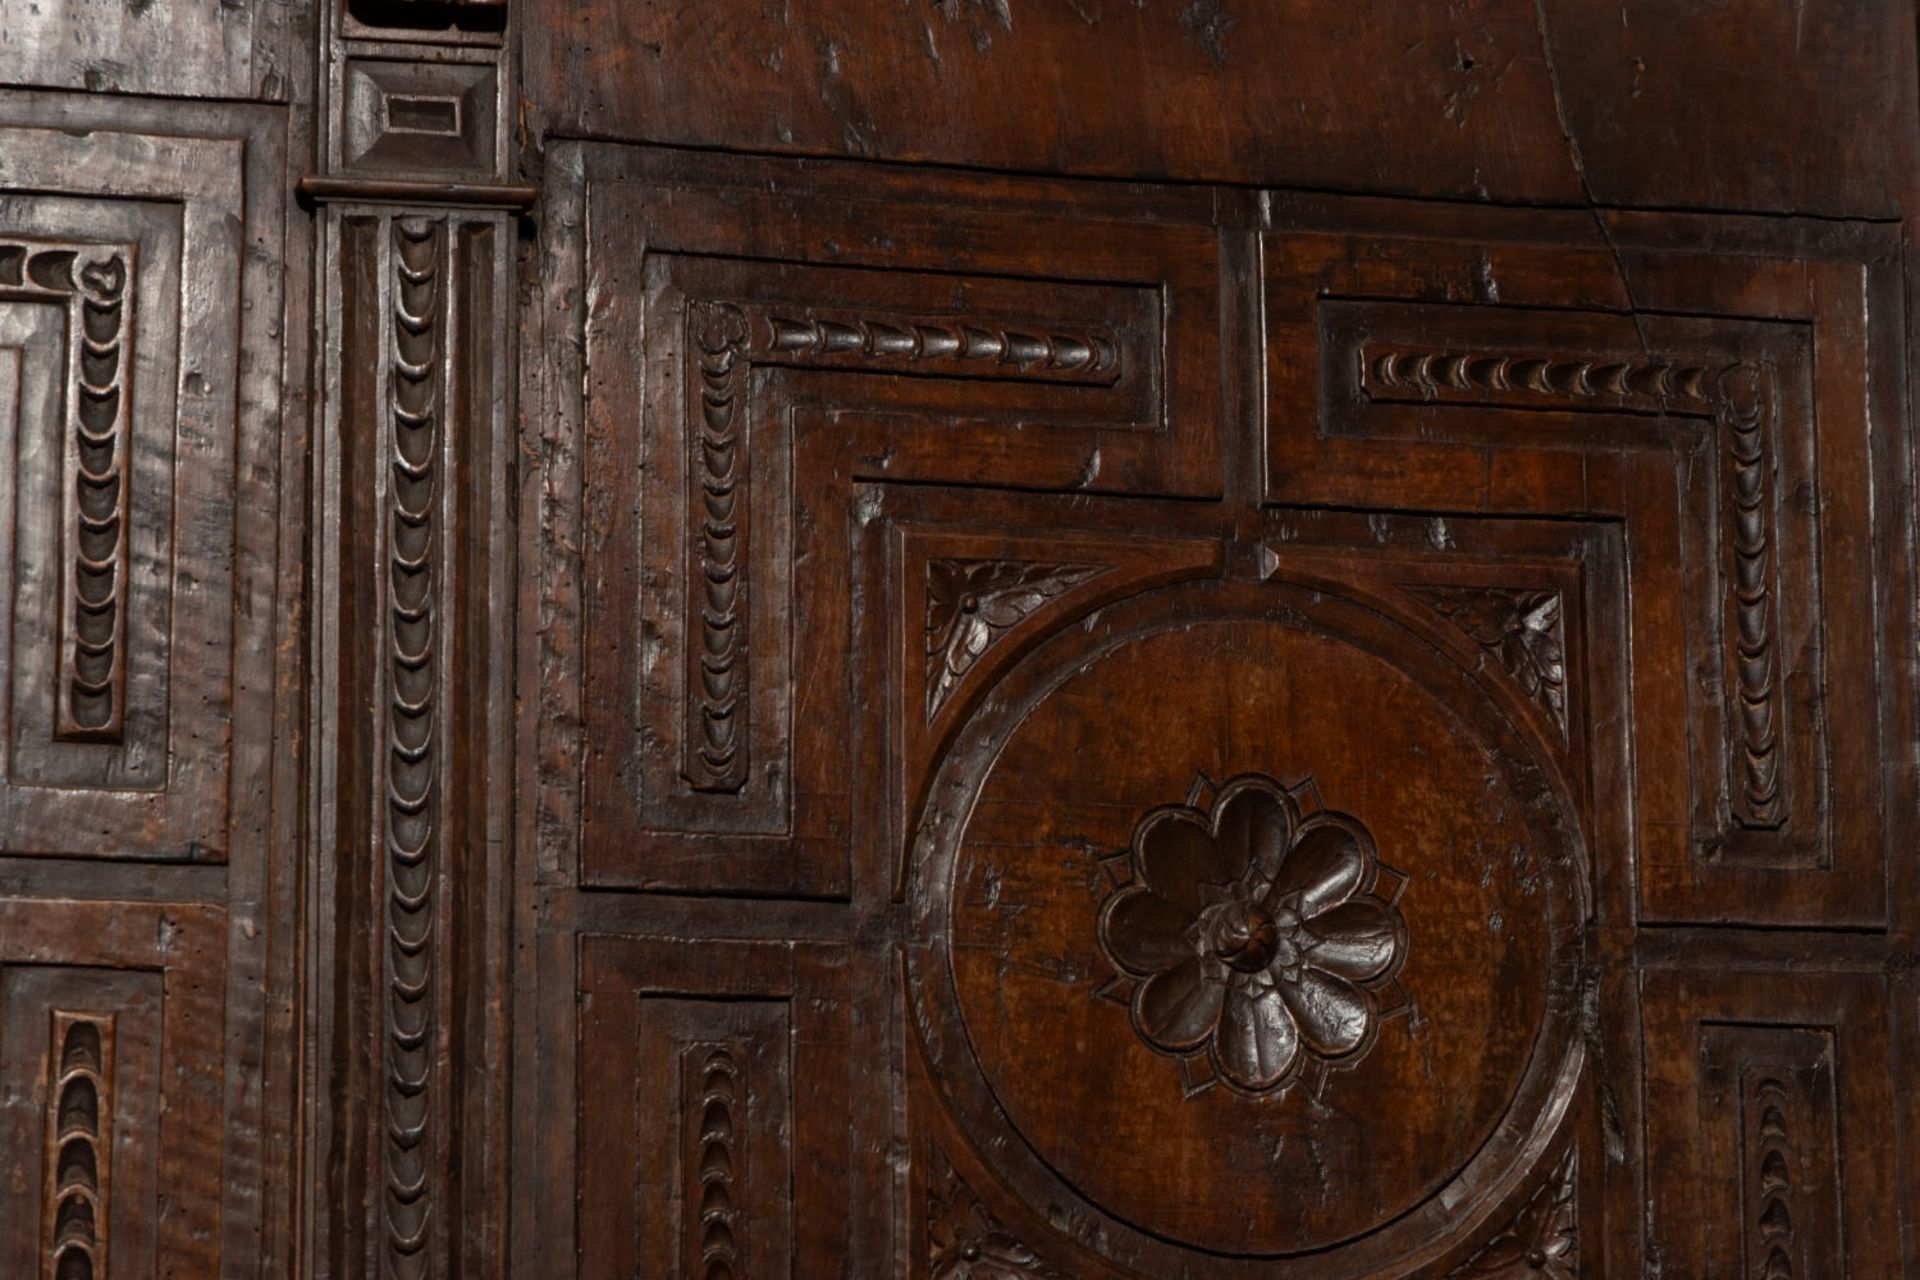 Late Gothic early 16th century Escorial Spanish style choir bench, in oak - Image 3 of 4